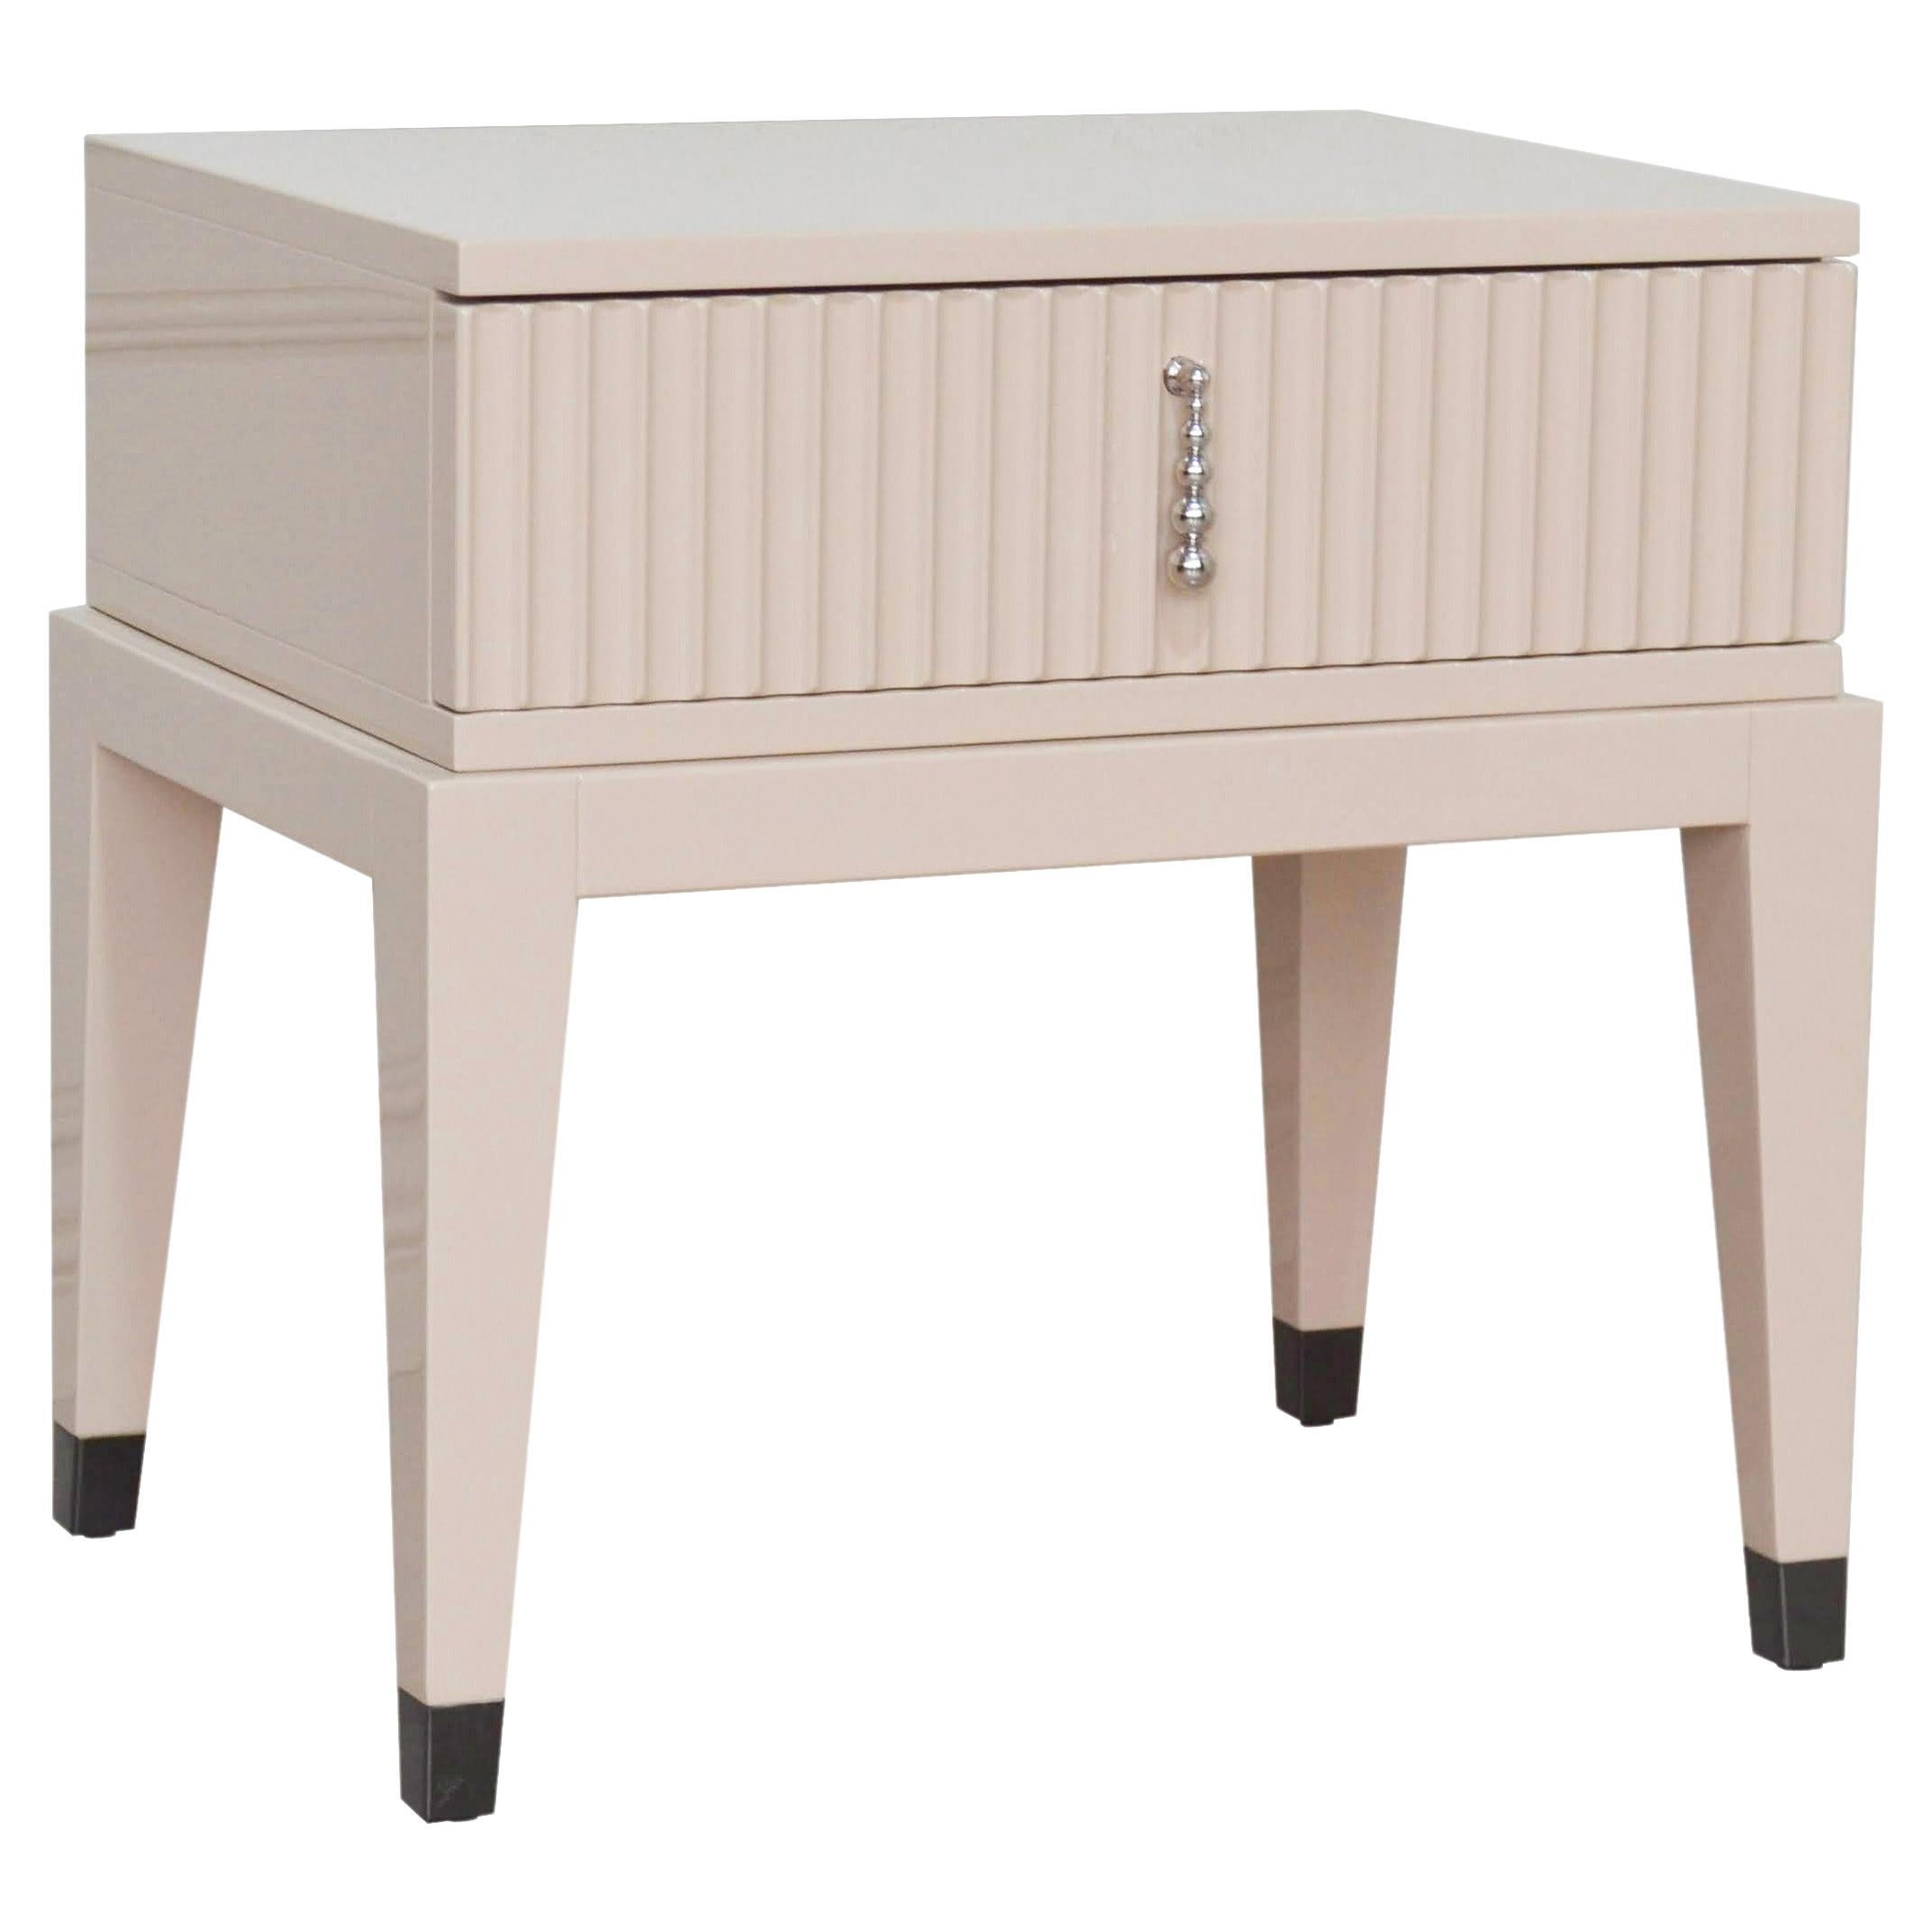 Italian Night Table in Beige/Cappuccino High Gloss Laquered Finish with Drawer